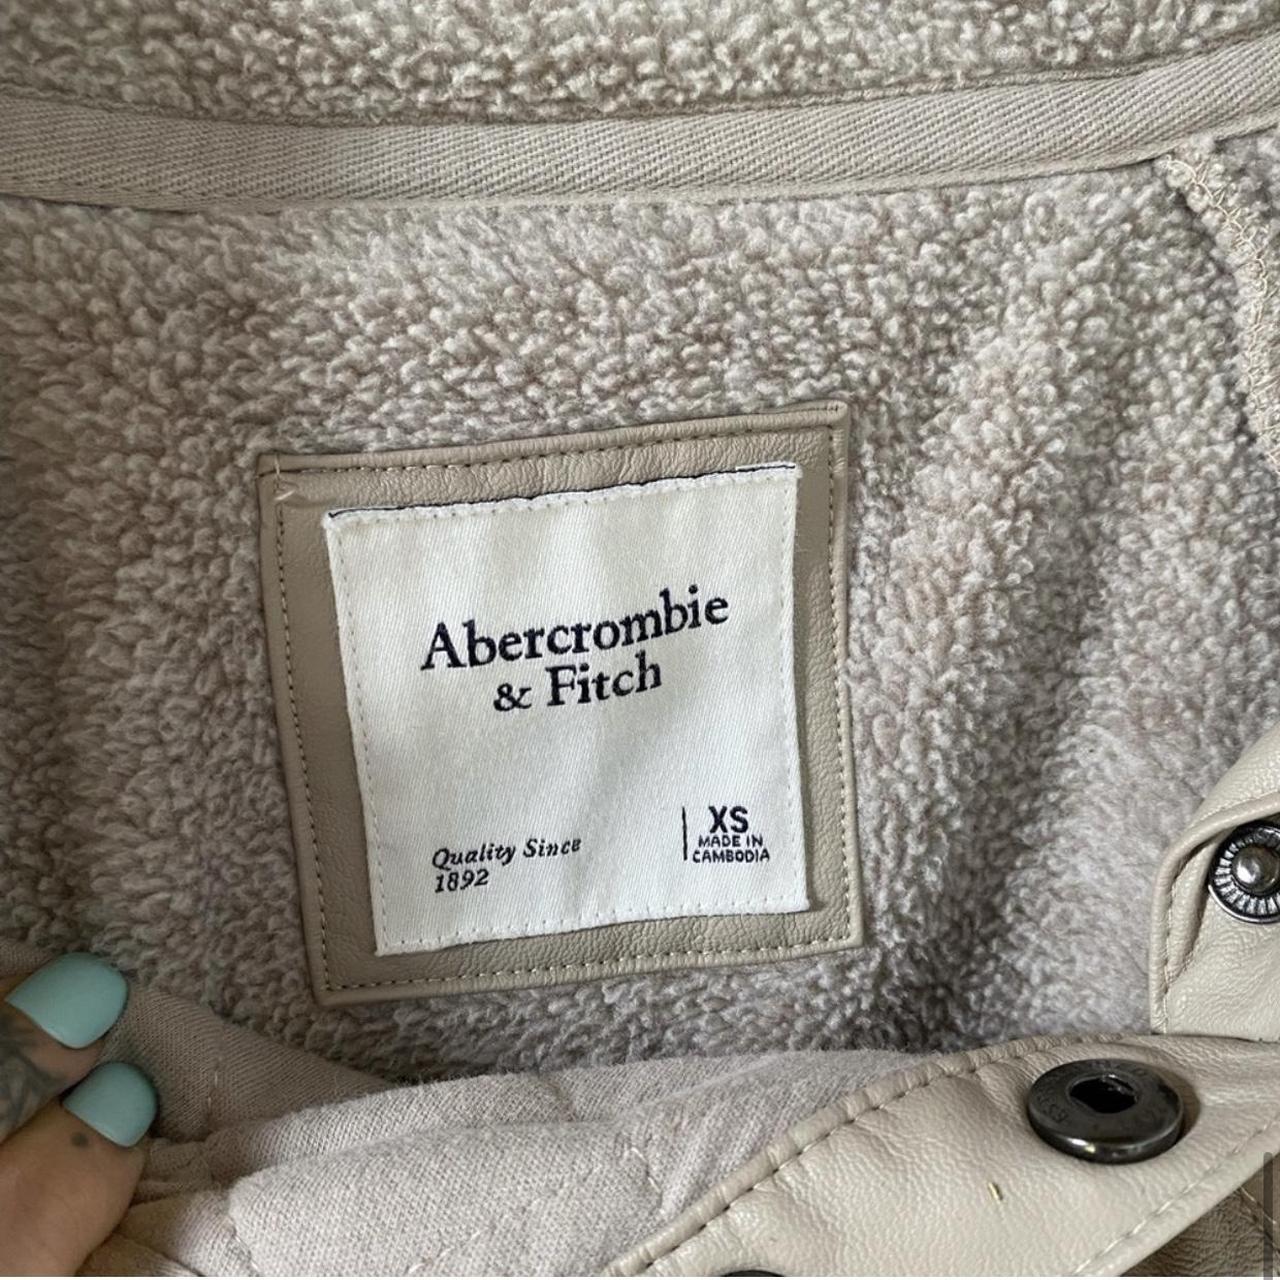 Can Anyone Date This Abercrombie & Fitch Label : r/Depop